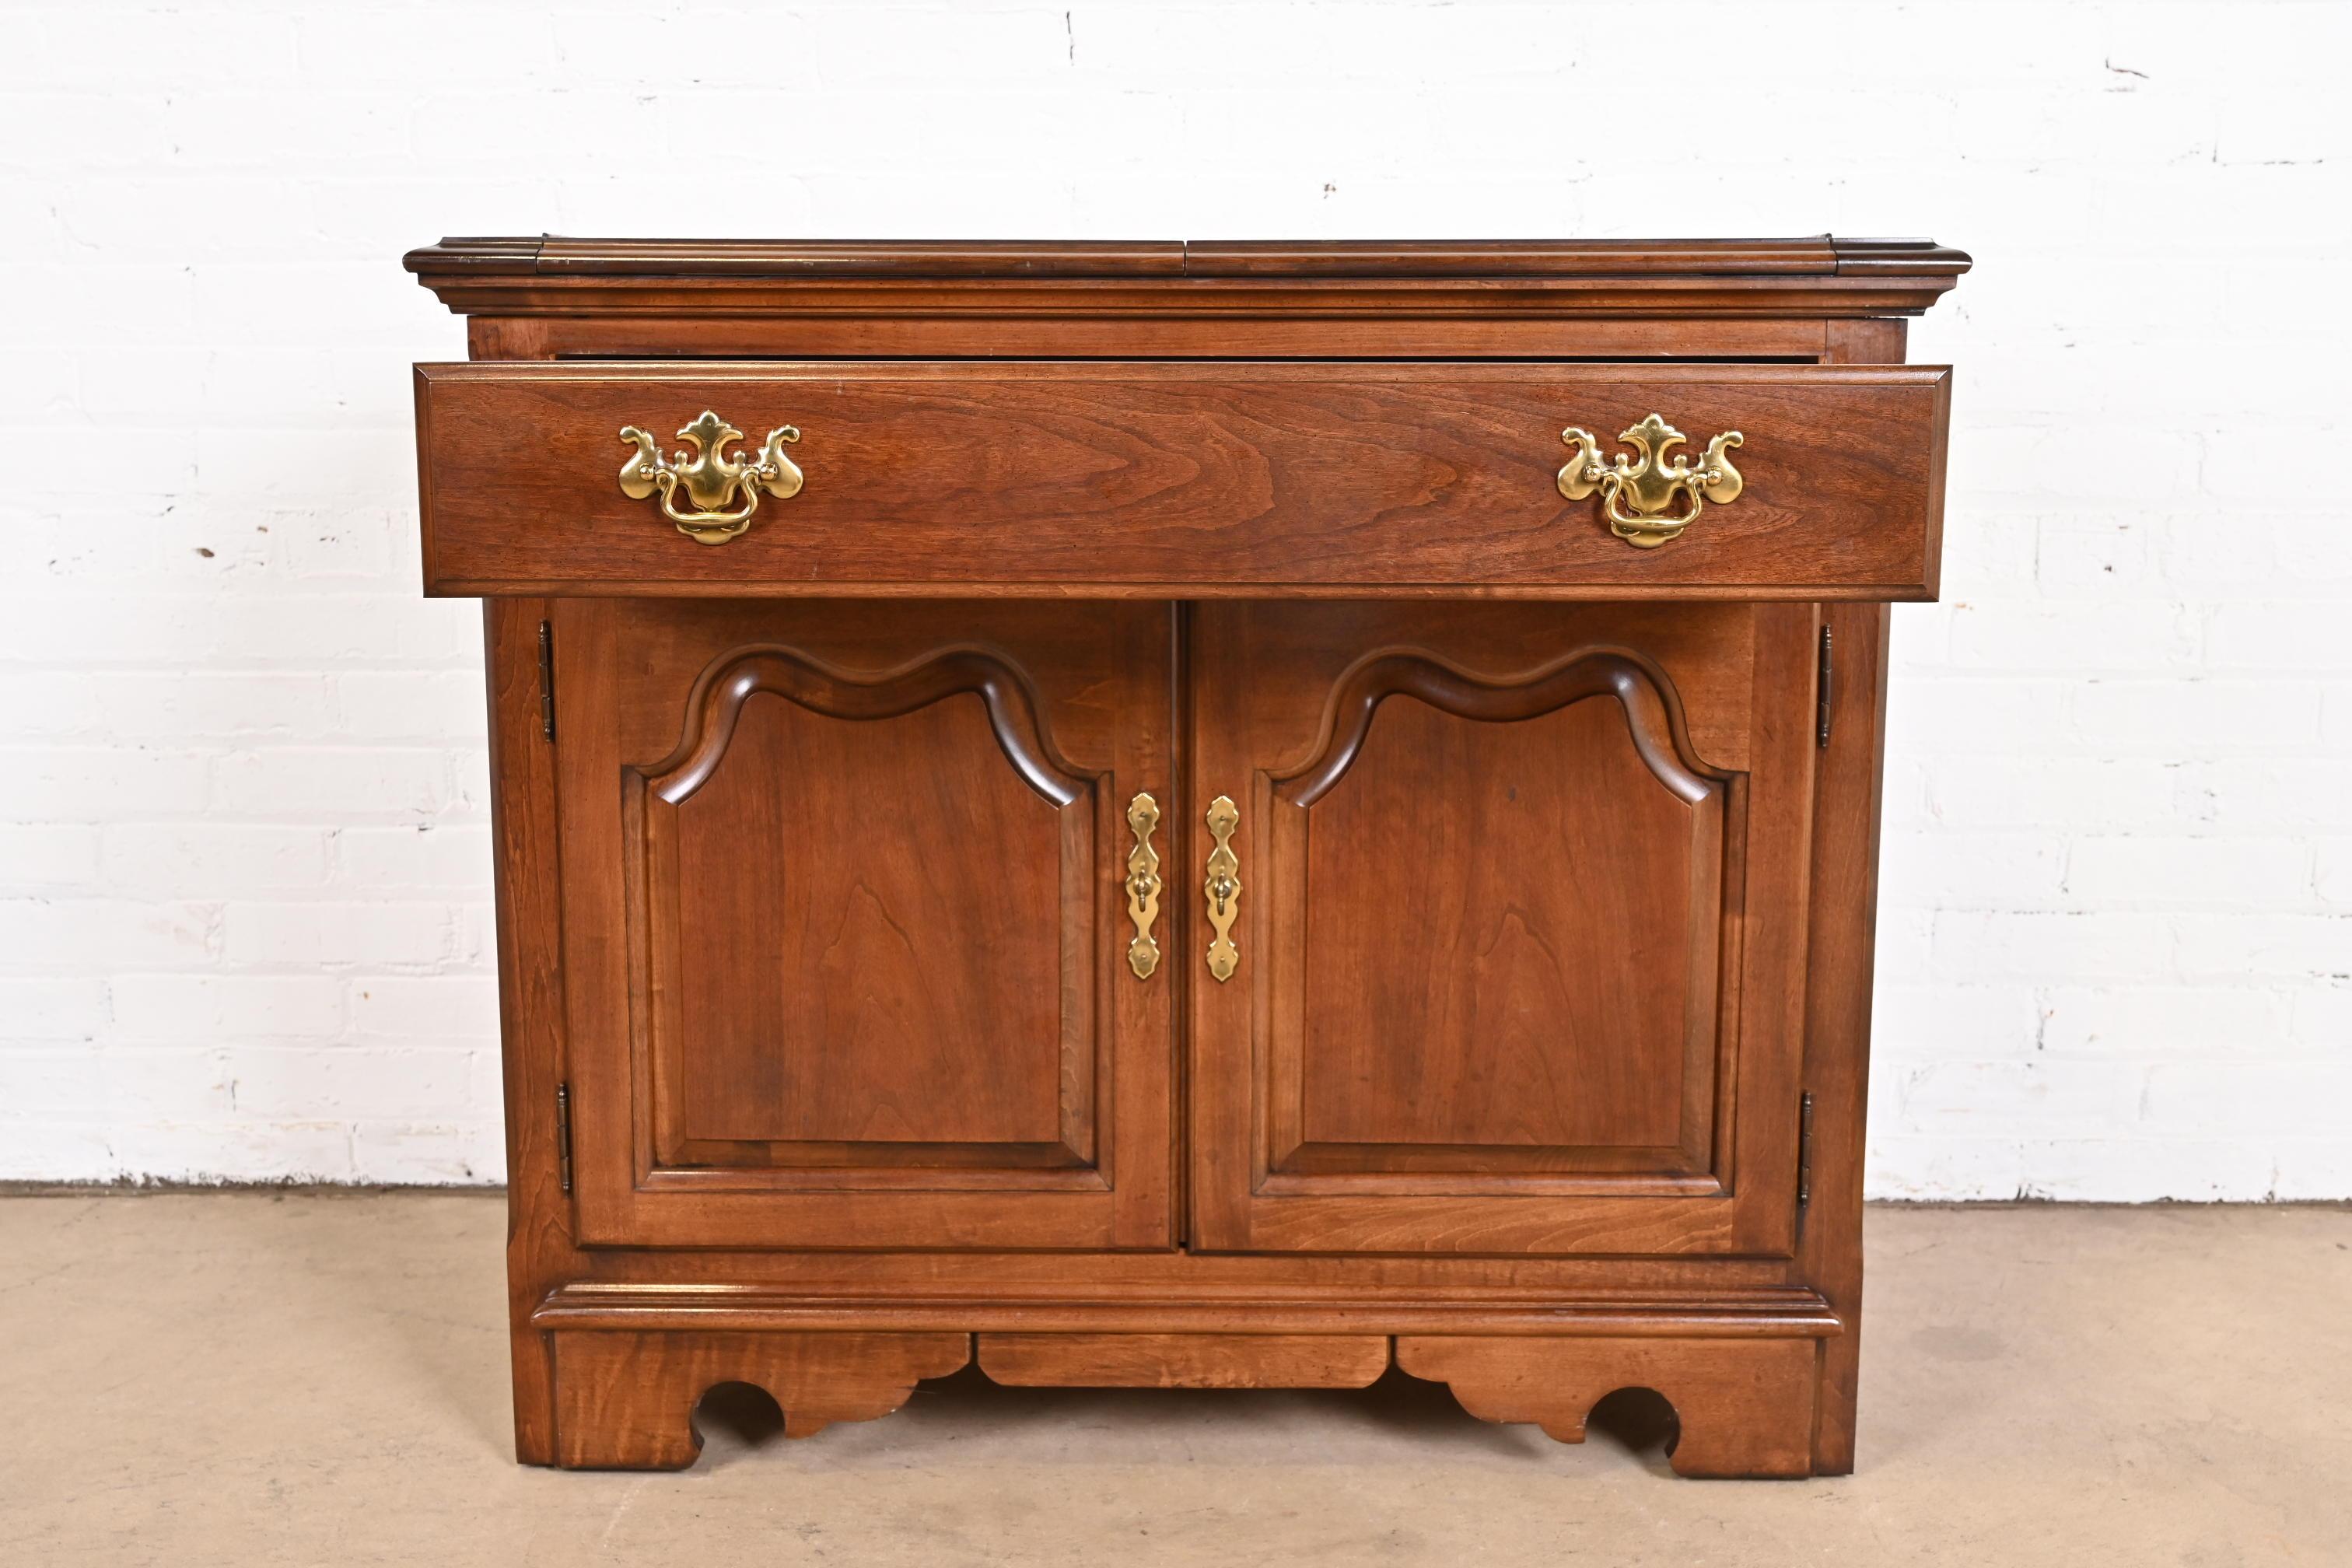 Thomasville Georgian Solid Cherry Wood Flip Top Server or Bar Cabinet In Good Condition For Sale In South Bend, IN